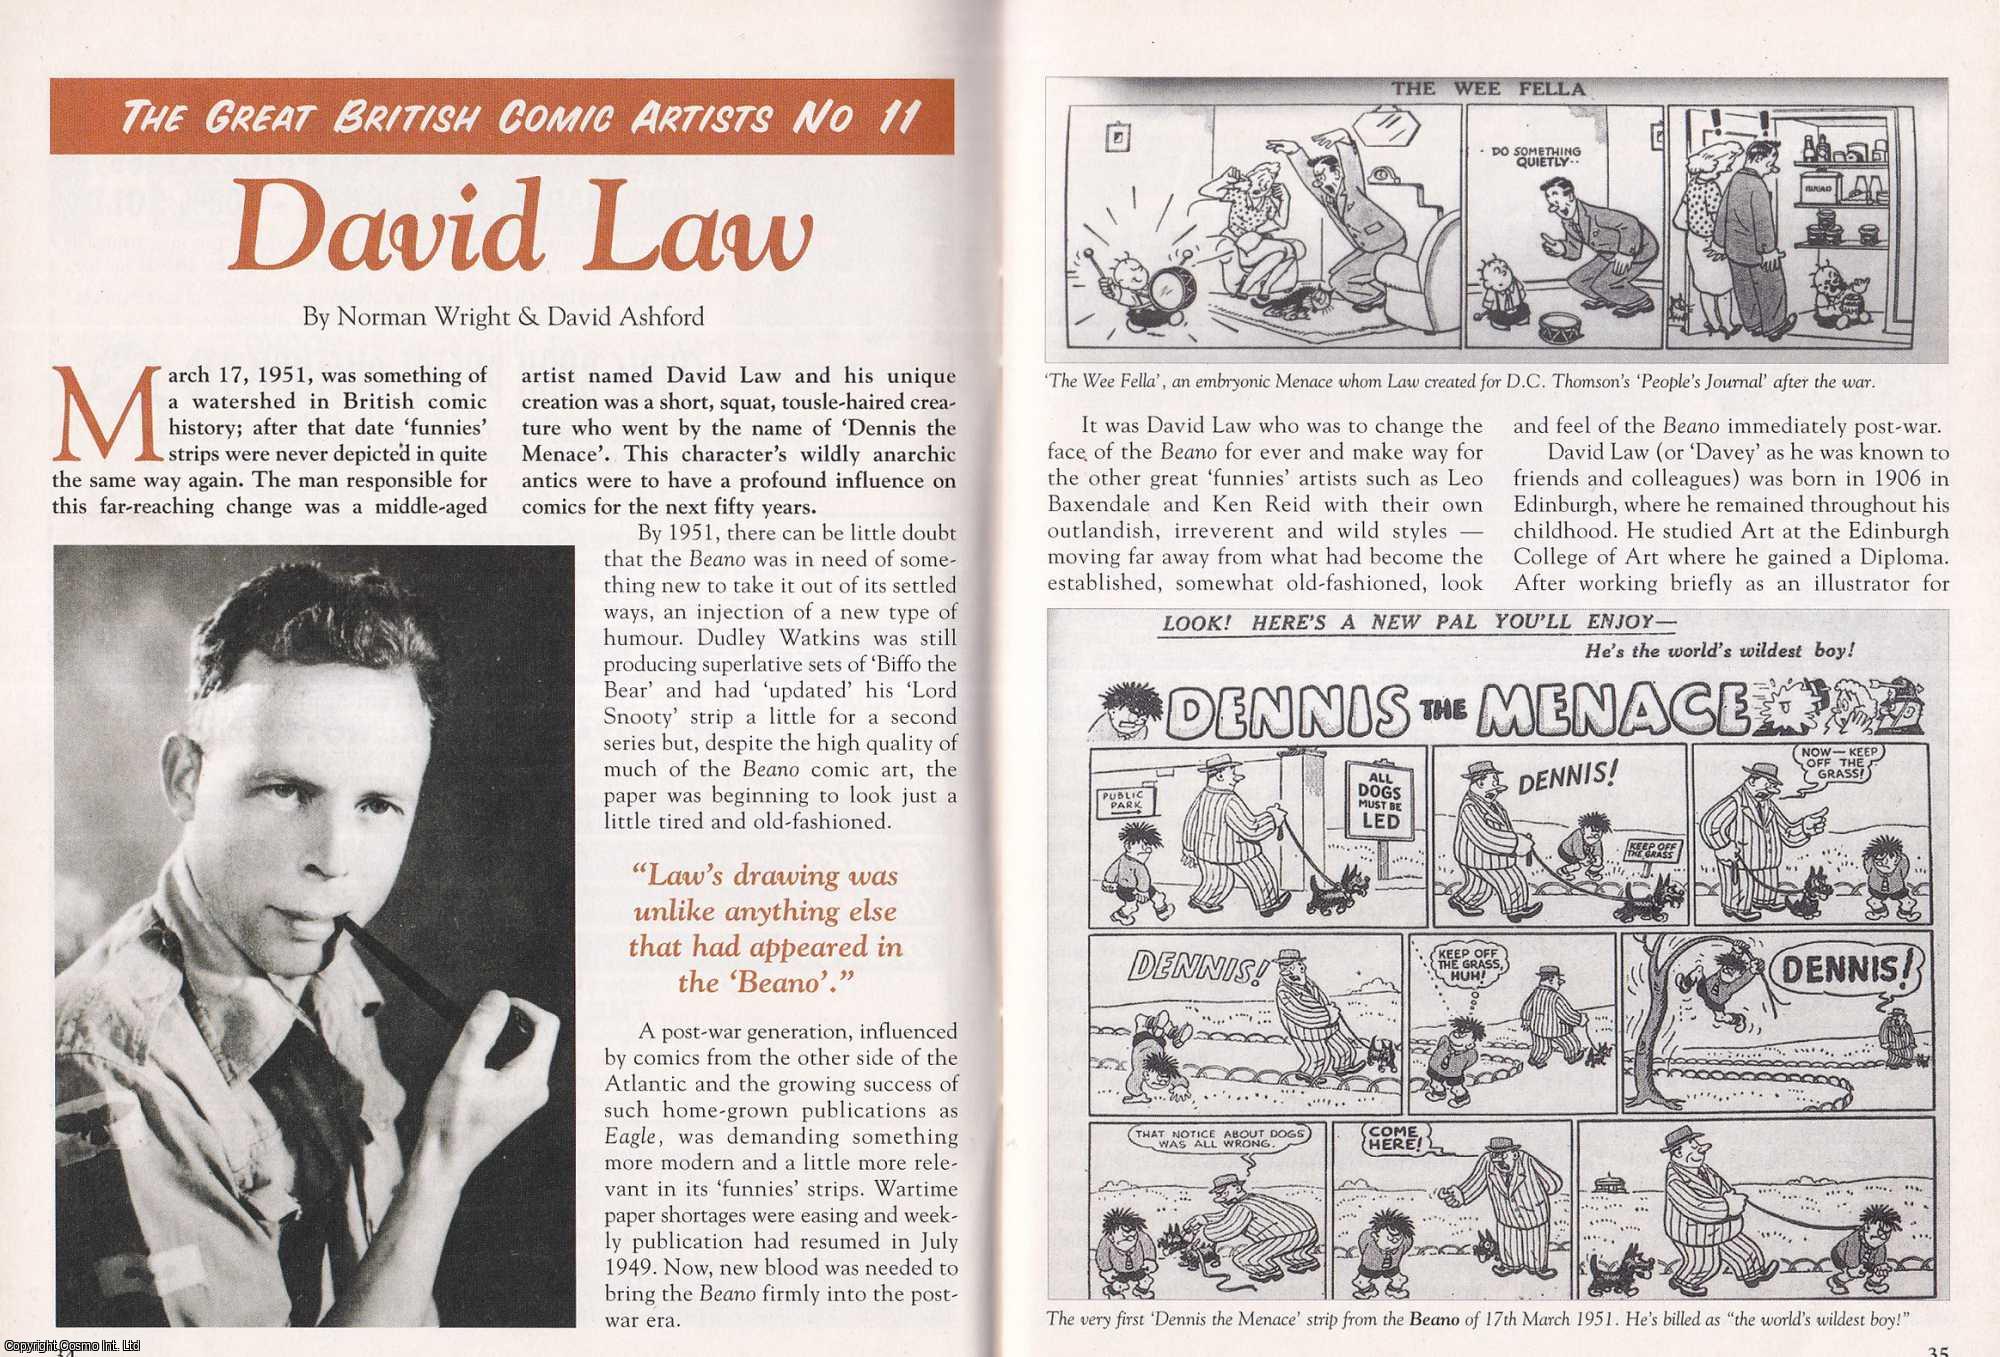 Norman Wright & David Ashford - David Law : The Great British Comic Artist. This is an original article separated from an issue of The Book & Magazine Collector publication.